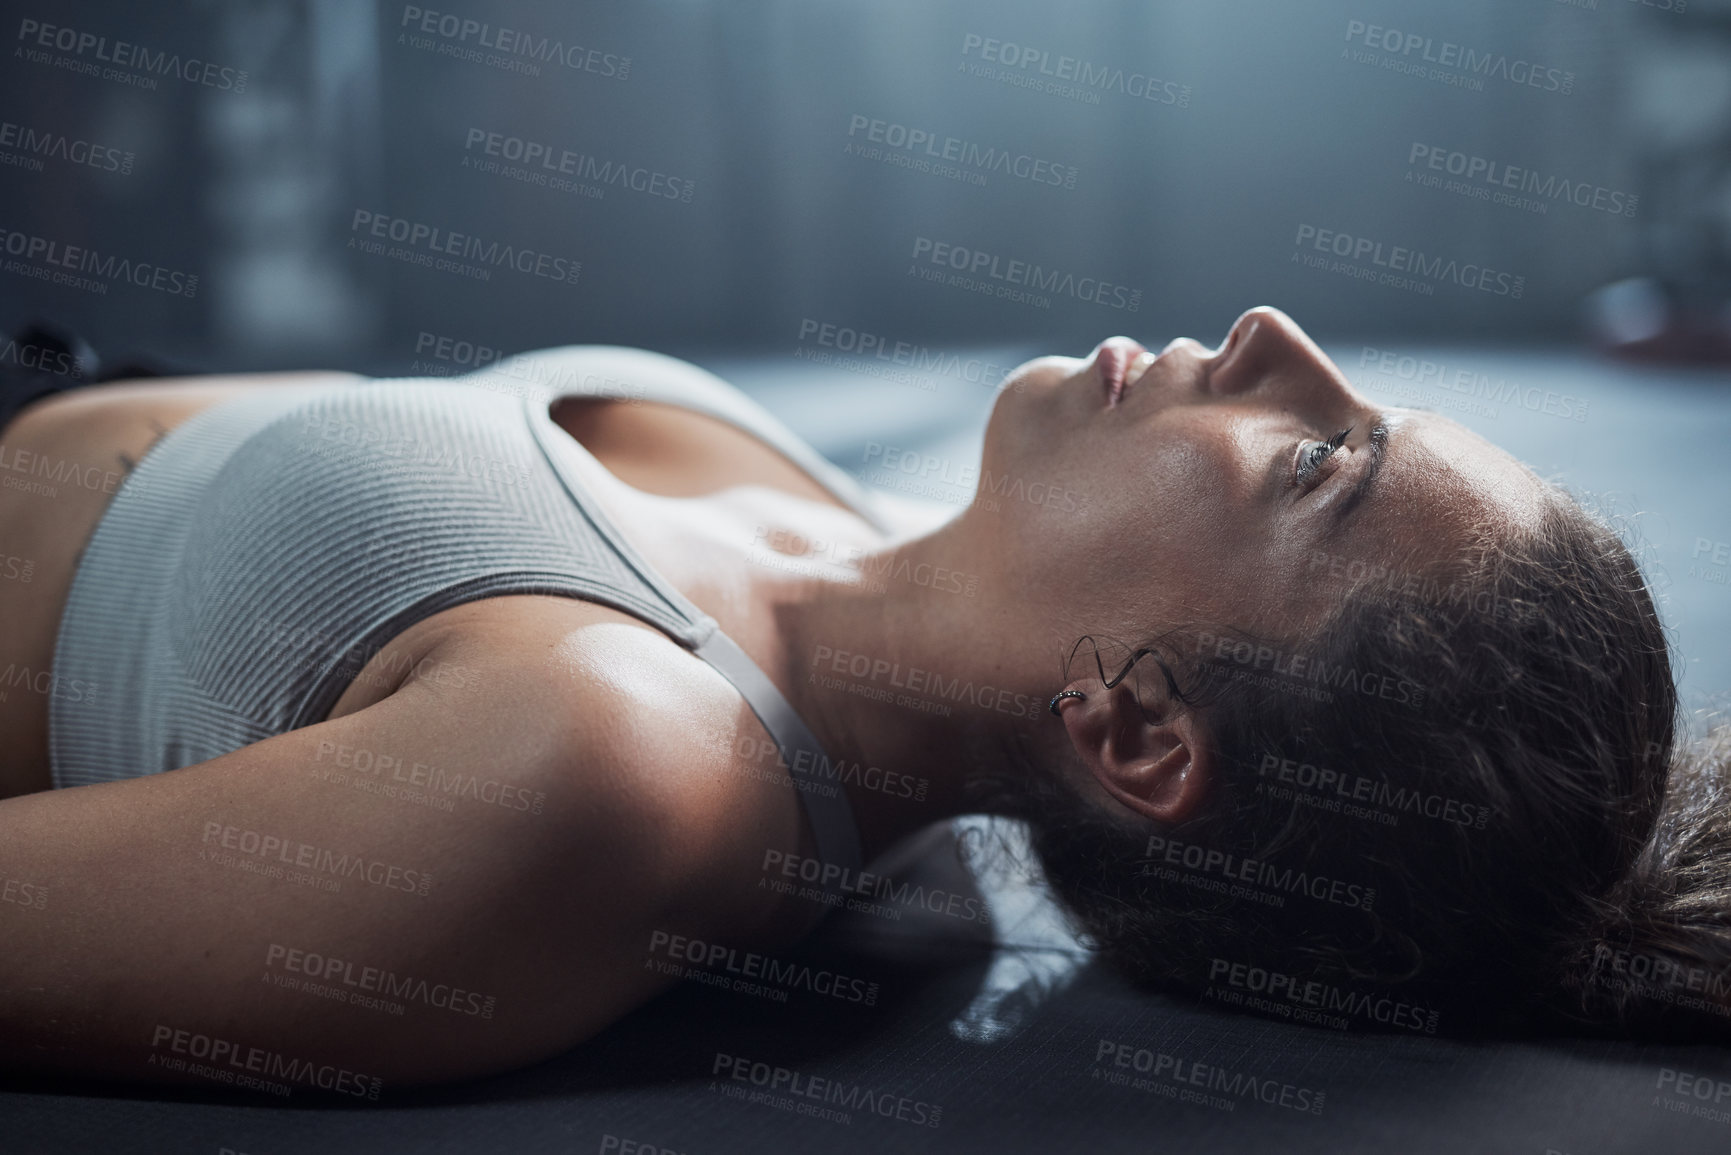 Buy stock photo Shot of a young woman taking a break from her workout at the gym